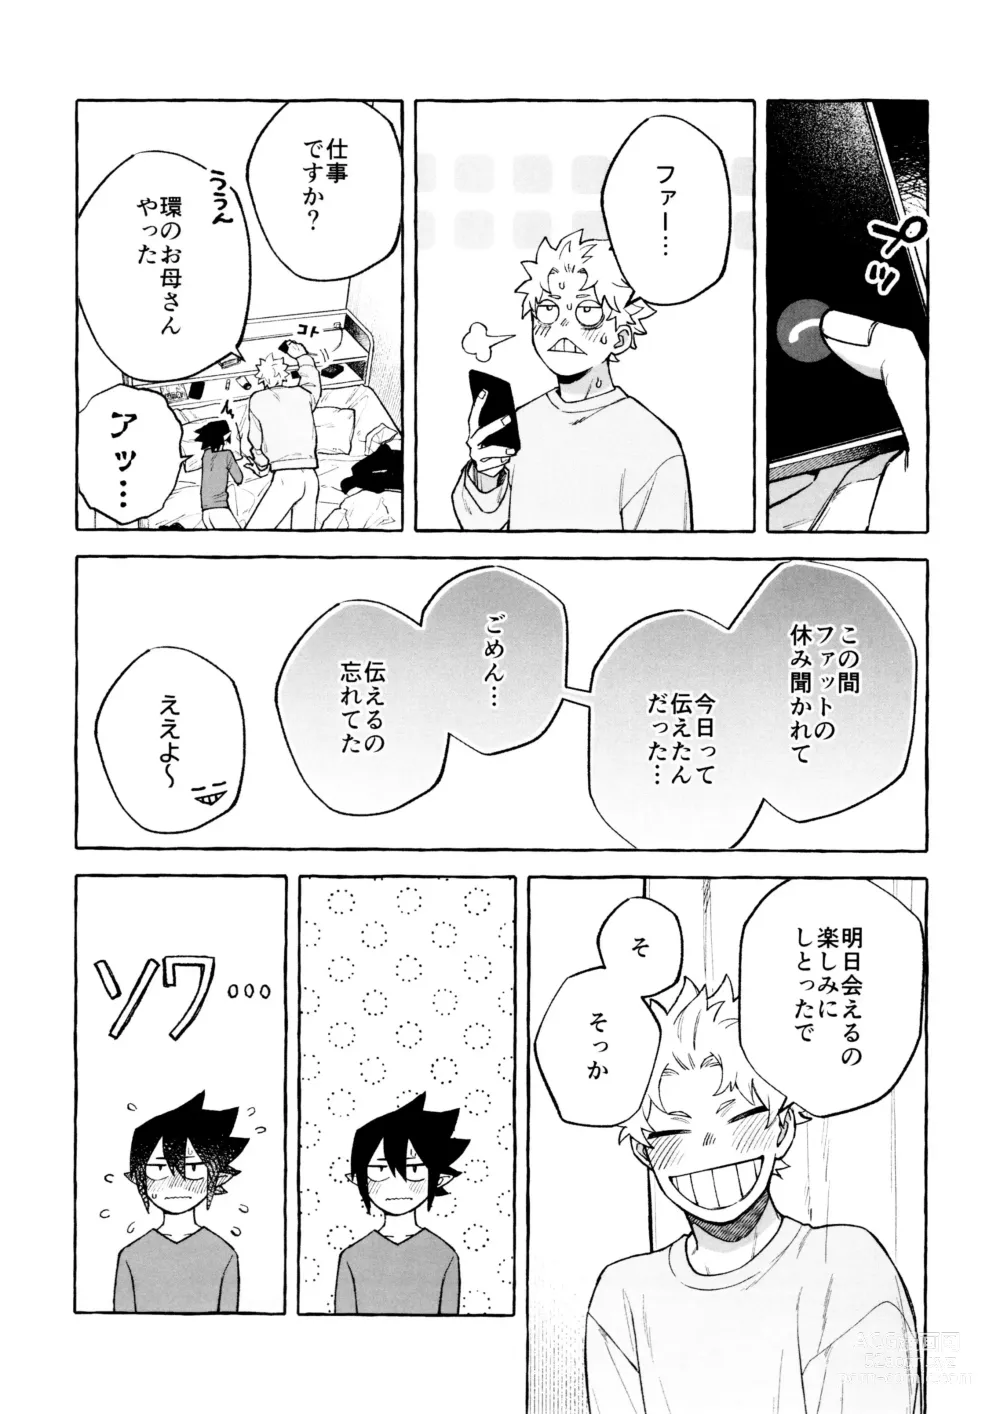 Page 13 of doujinshi Please please